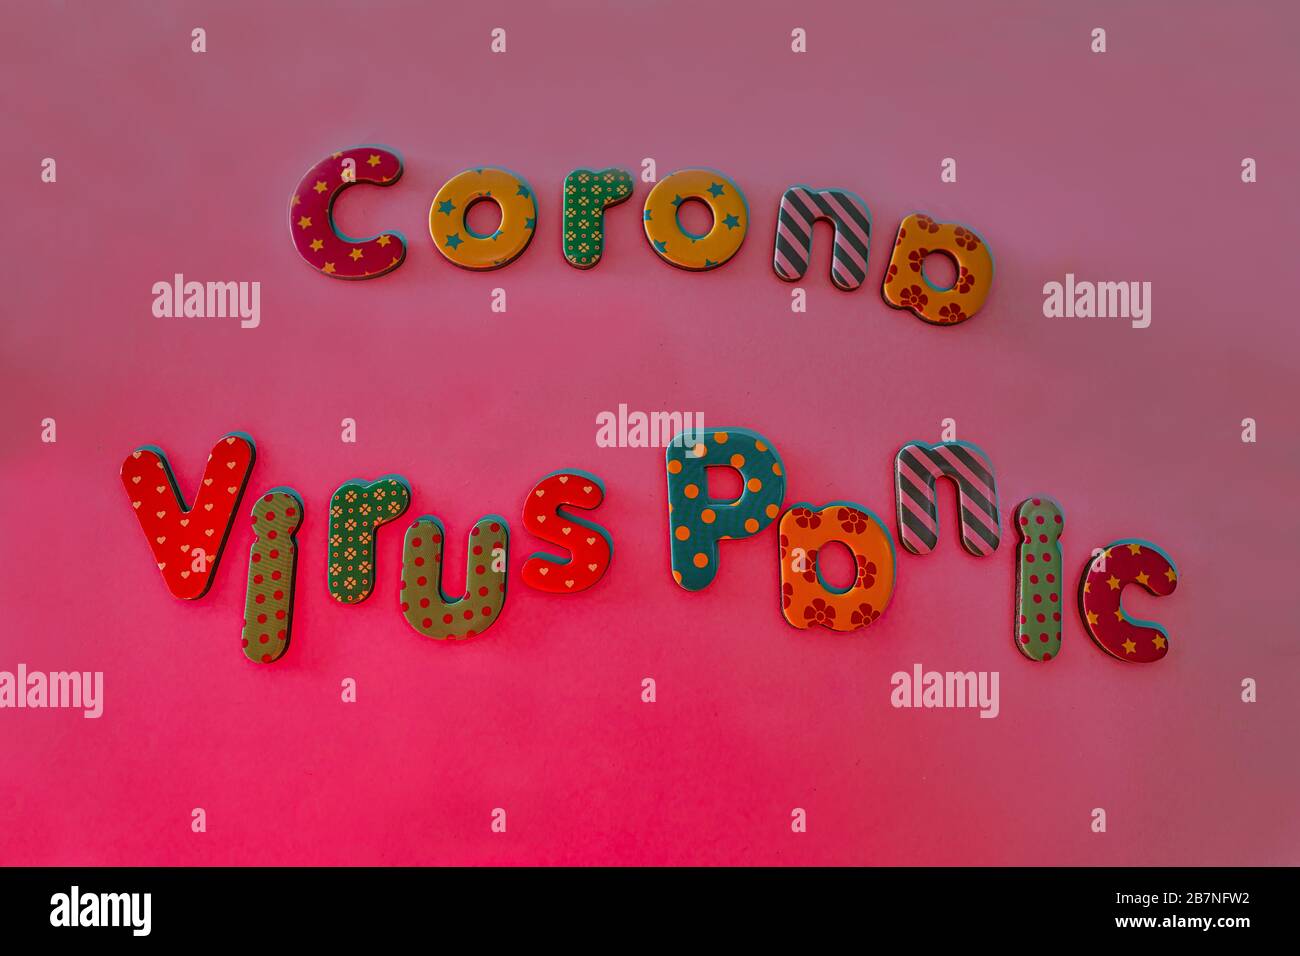 Corona virus panic written bei colored letters as symbol for the global covid-19 fear within pantone background color. Stock Photo